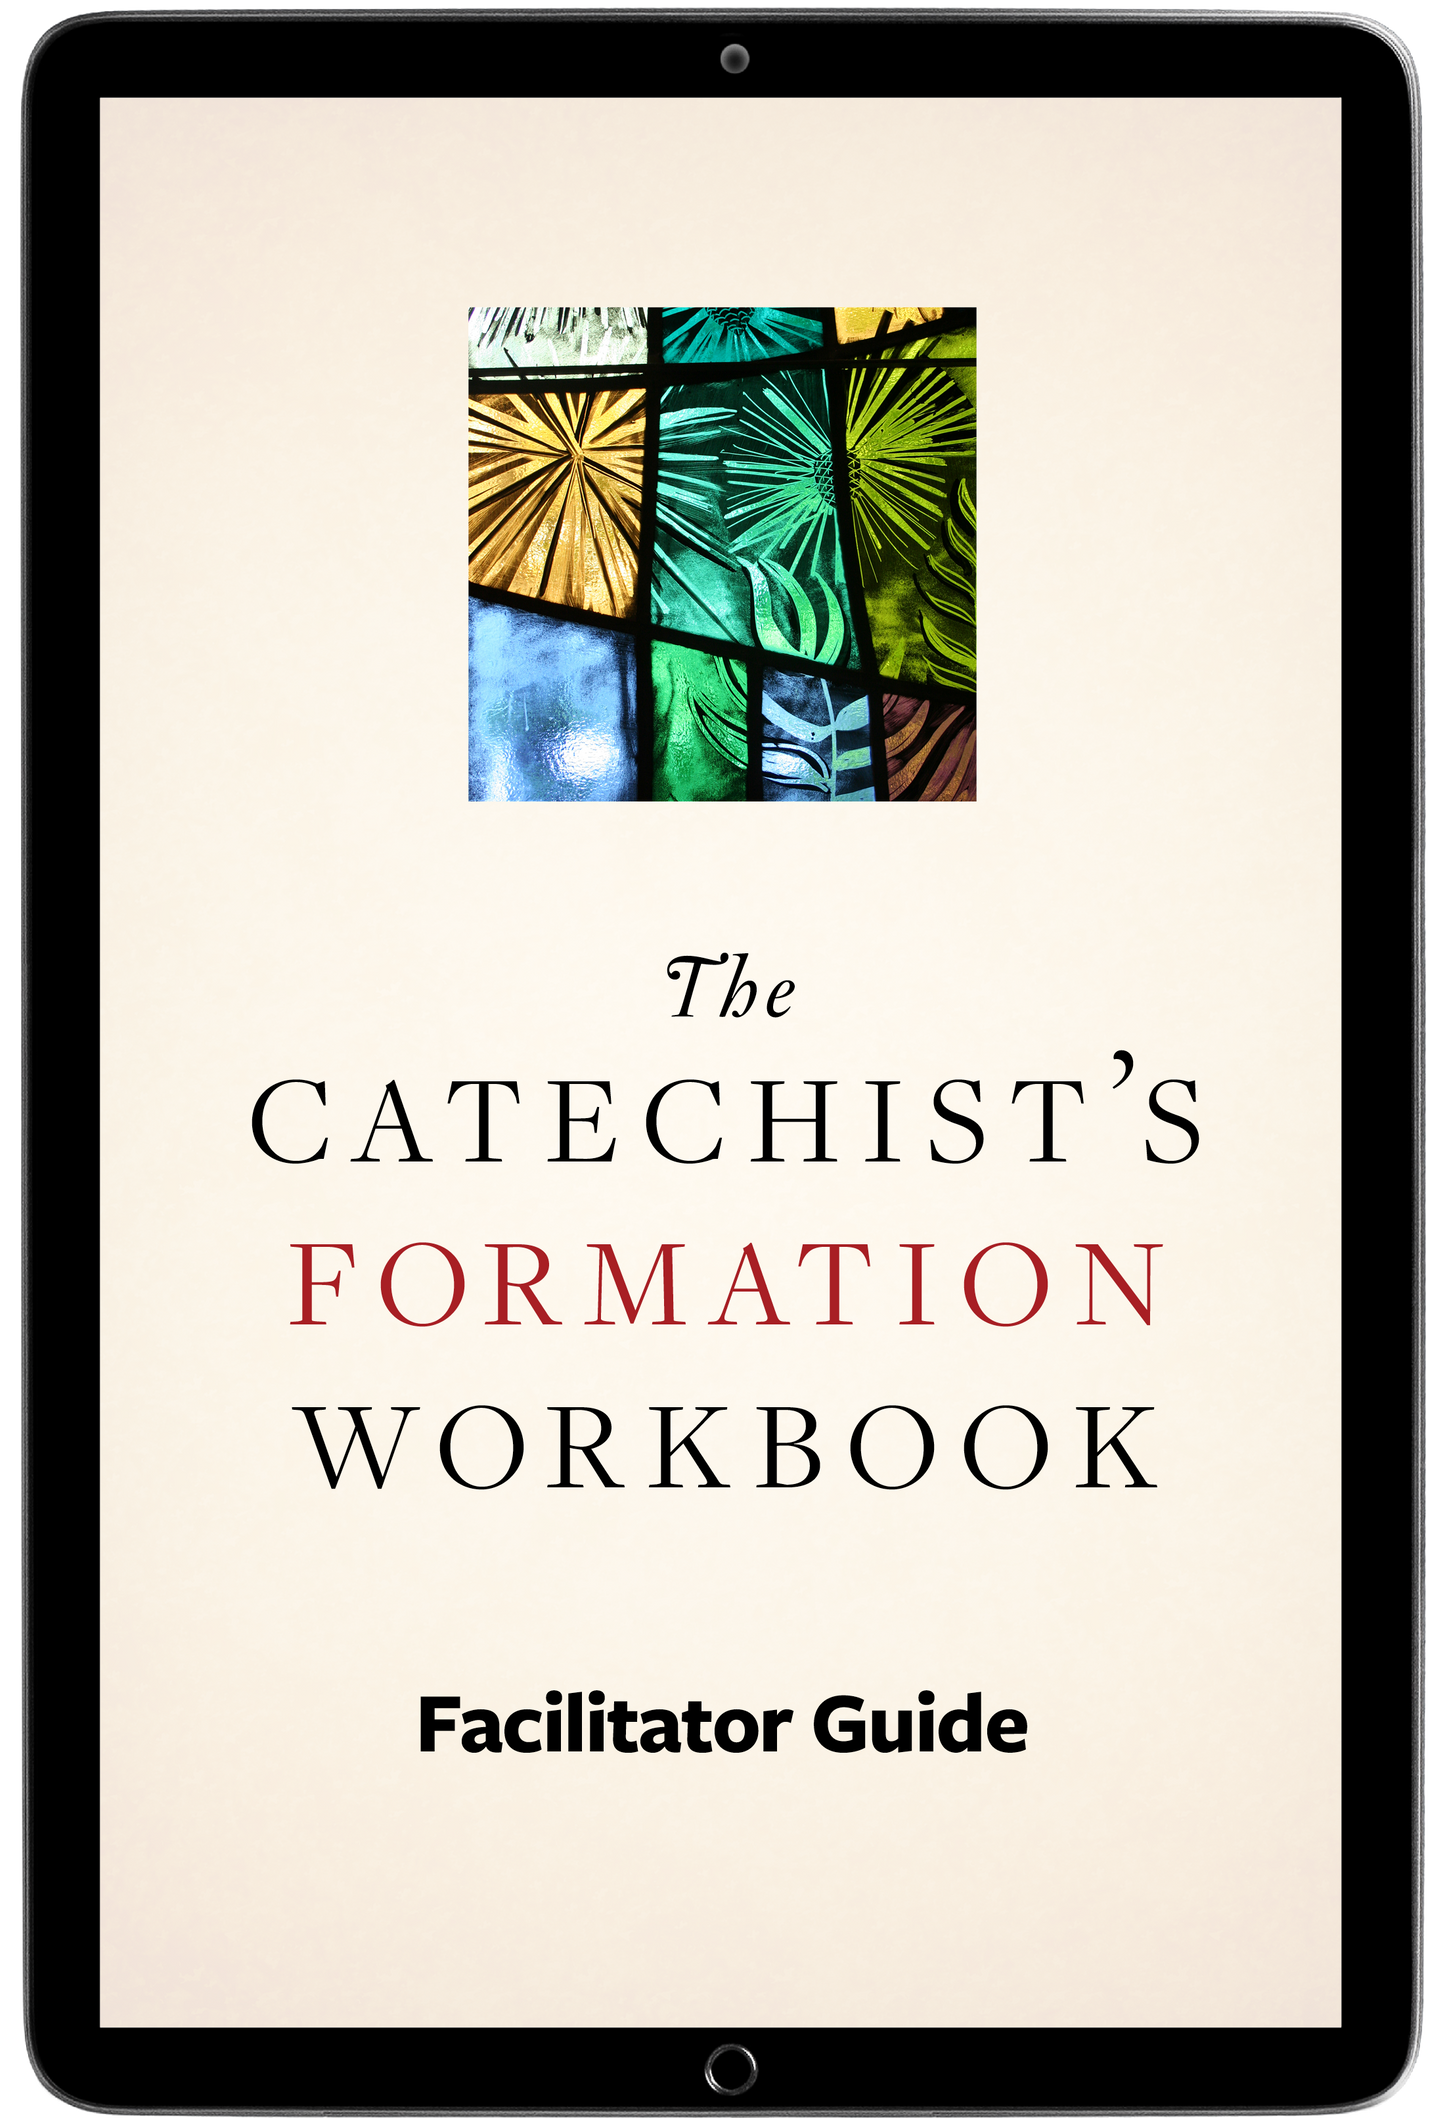 The Catechist's Formation Workbook Facilitator Guide